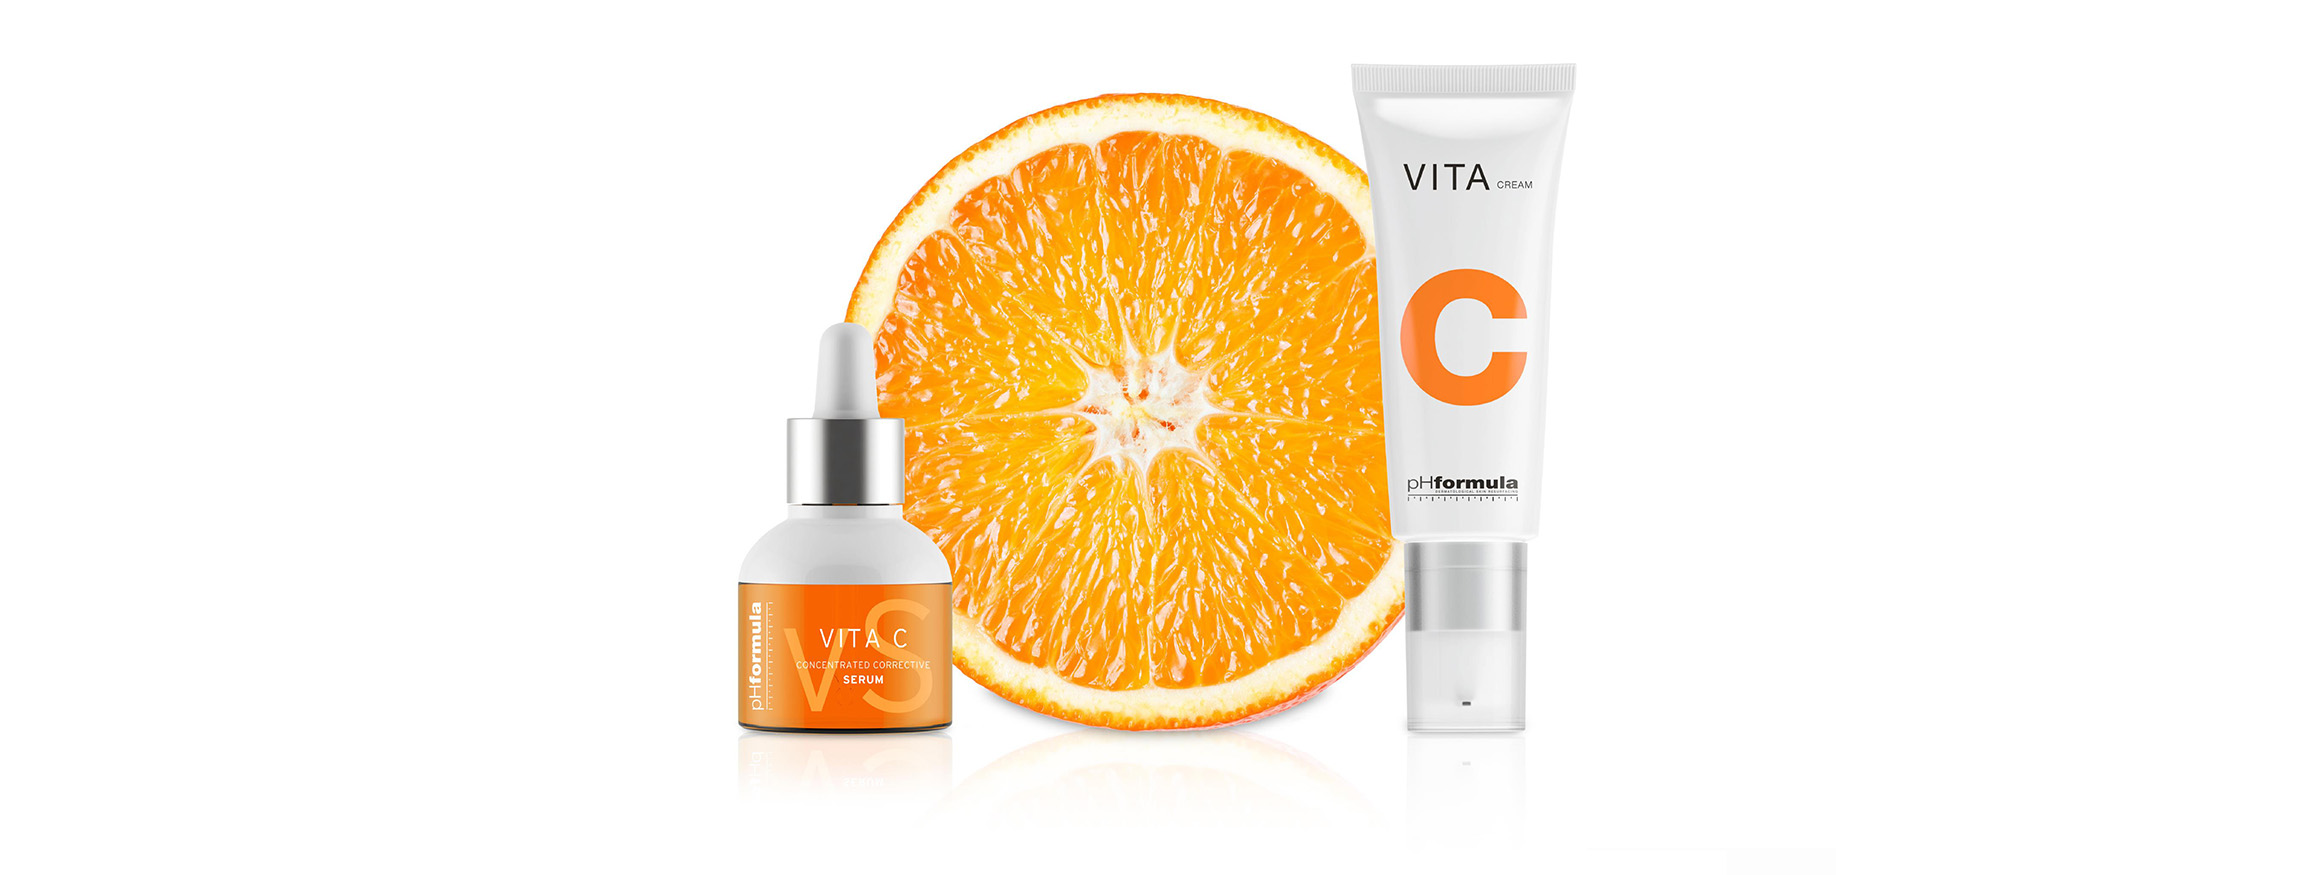 What makes topical vitamin C preparations so important?